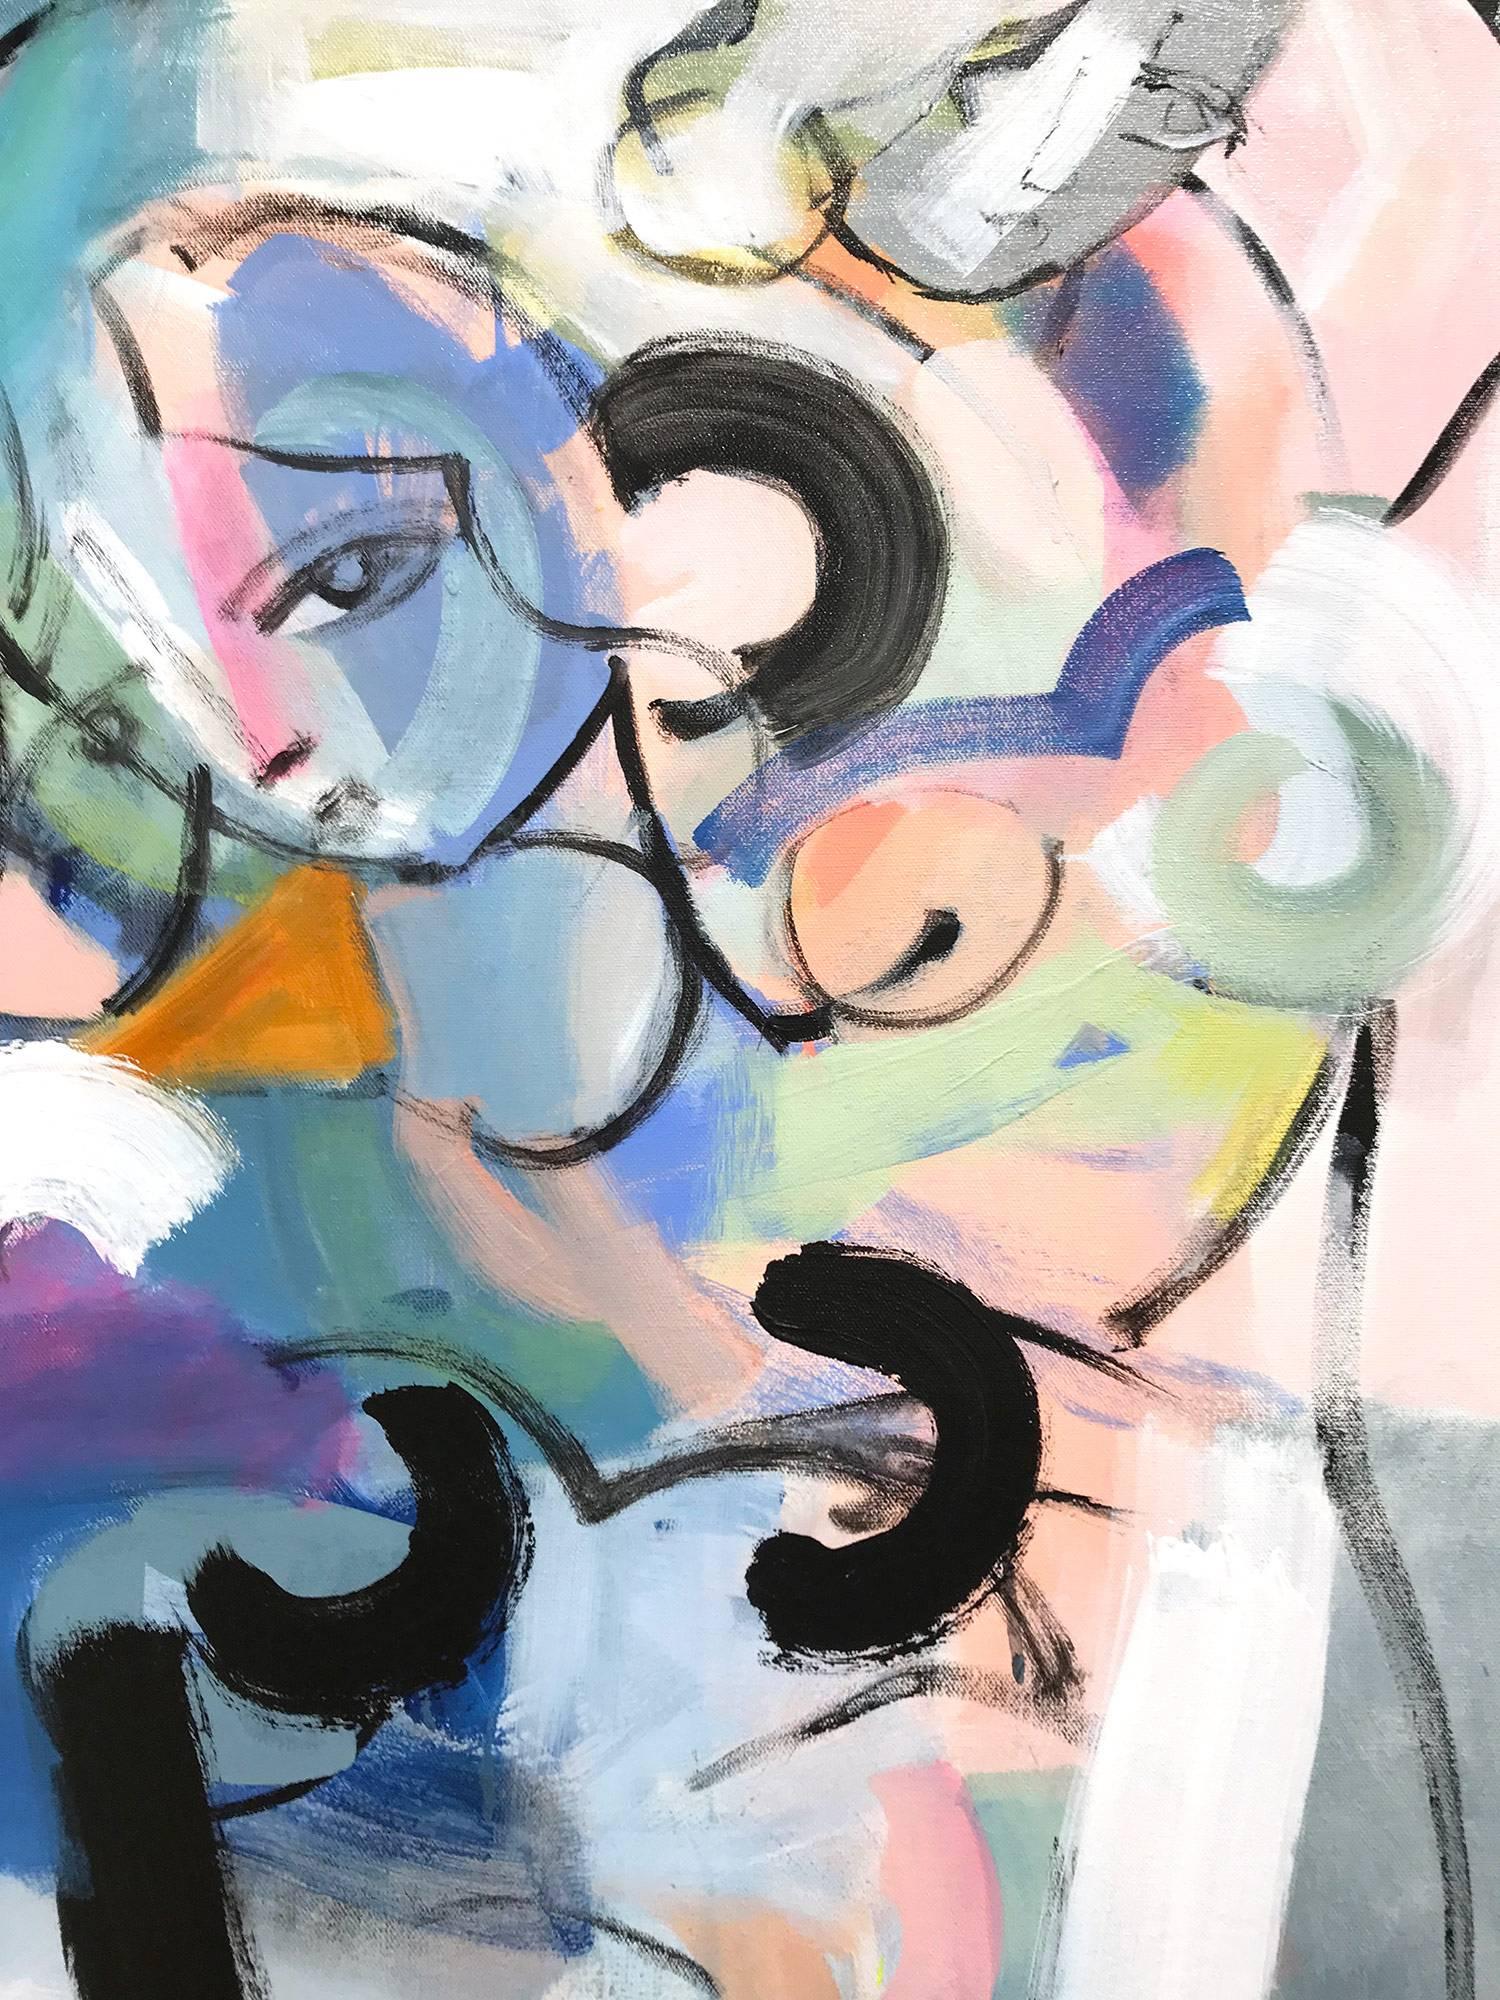 A modernist depiction of woman figures executed with strong use of line and texture. This piece is filled with movement and beautiful brushwork, the use of color placement is enchanting with a fascinating composition, exploring unique pallets with